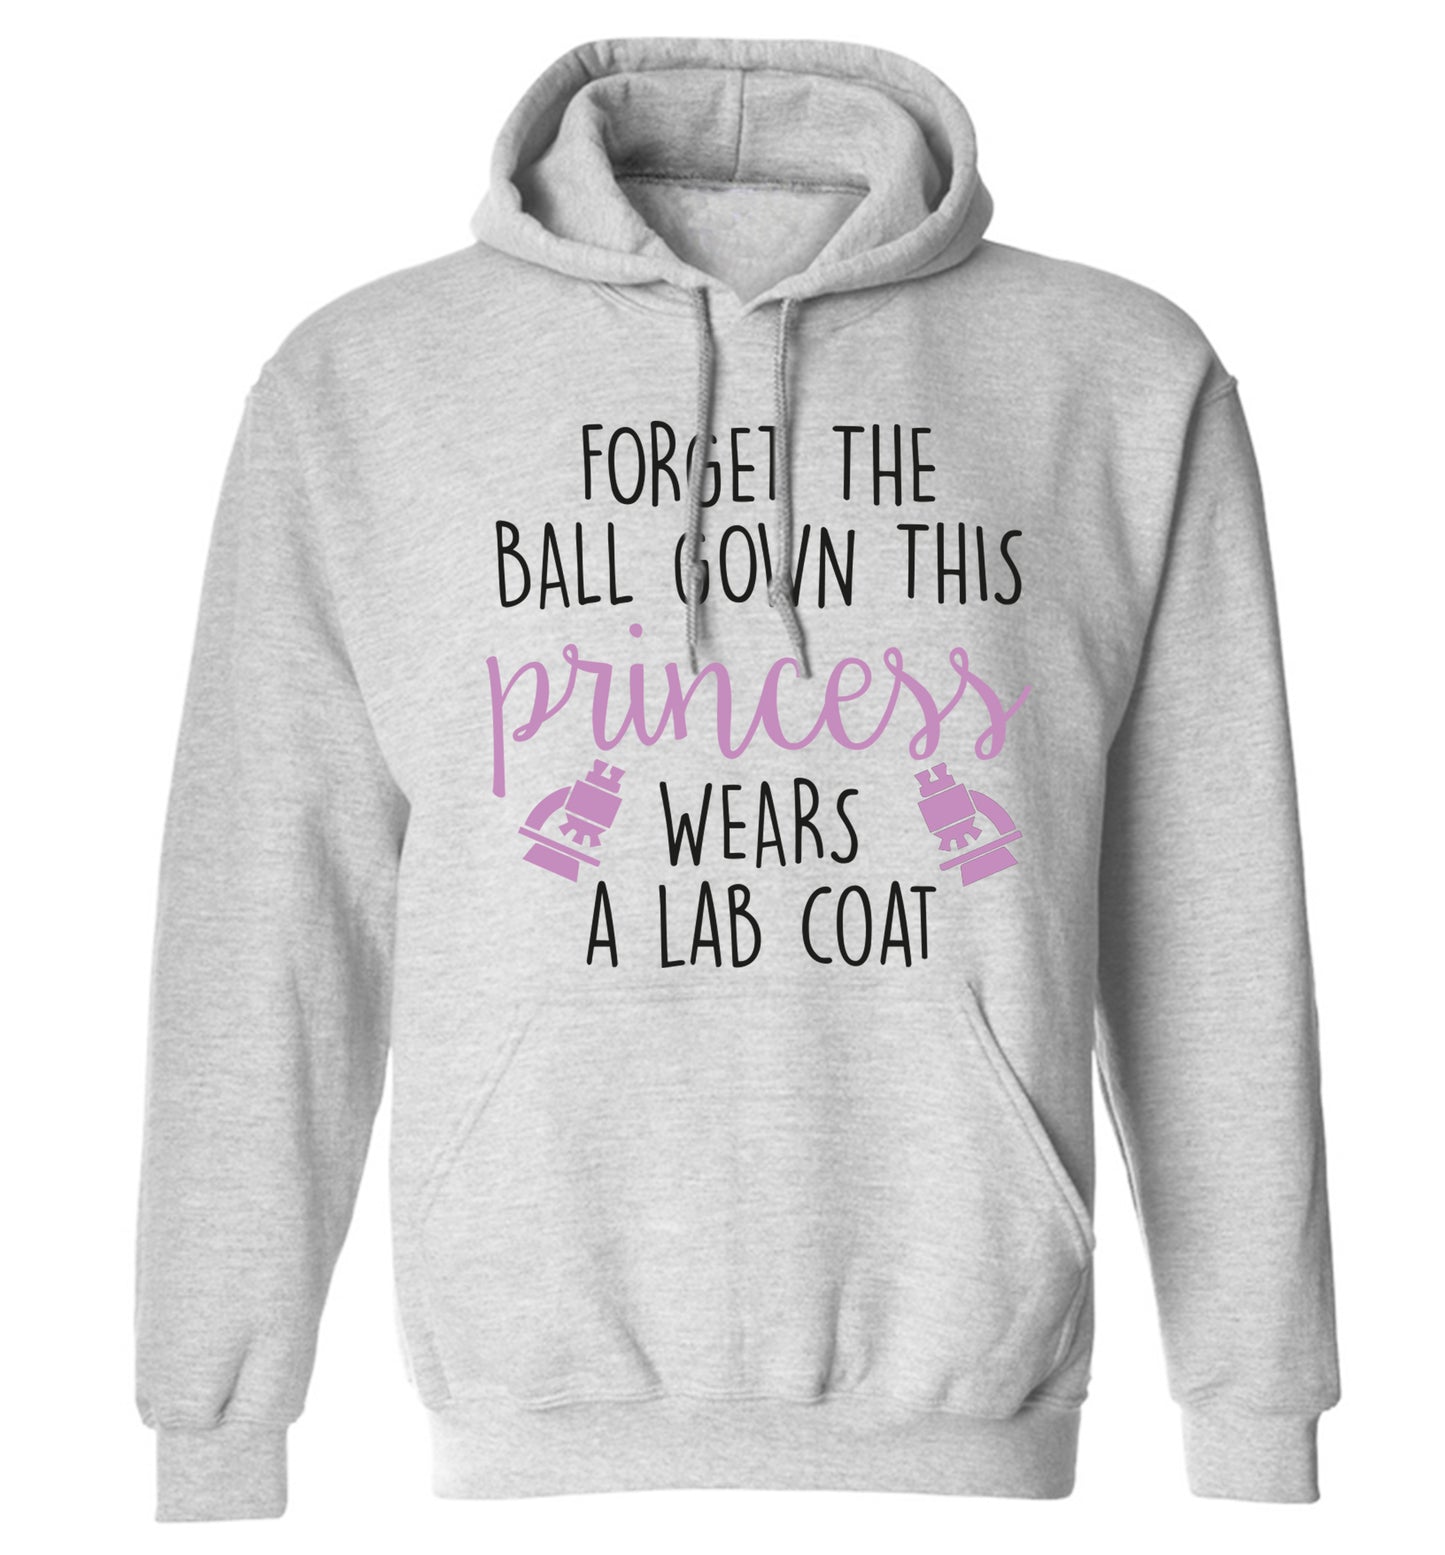 Forget the ball gown this princess wears a lab coat adults unisex grey hoodie 2XL